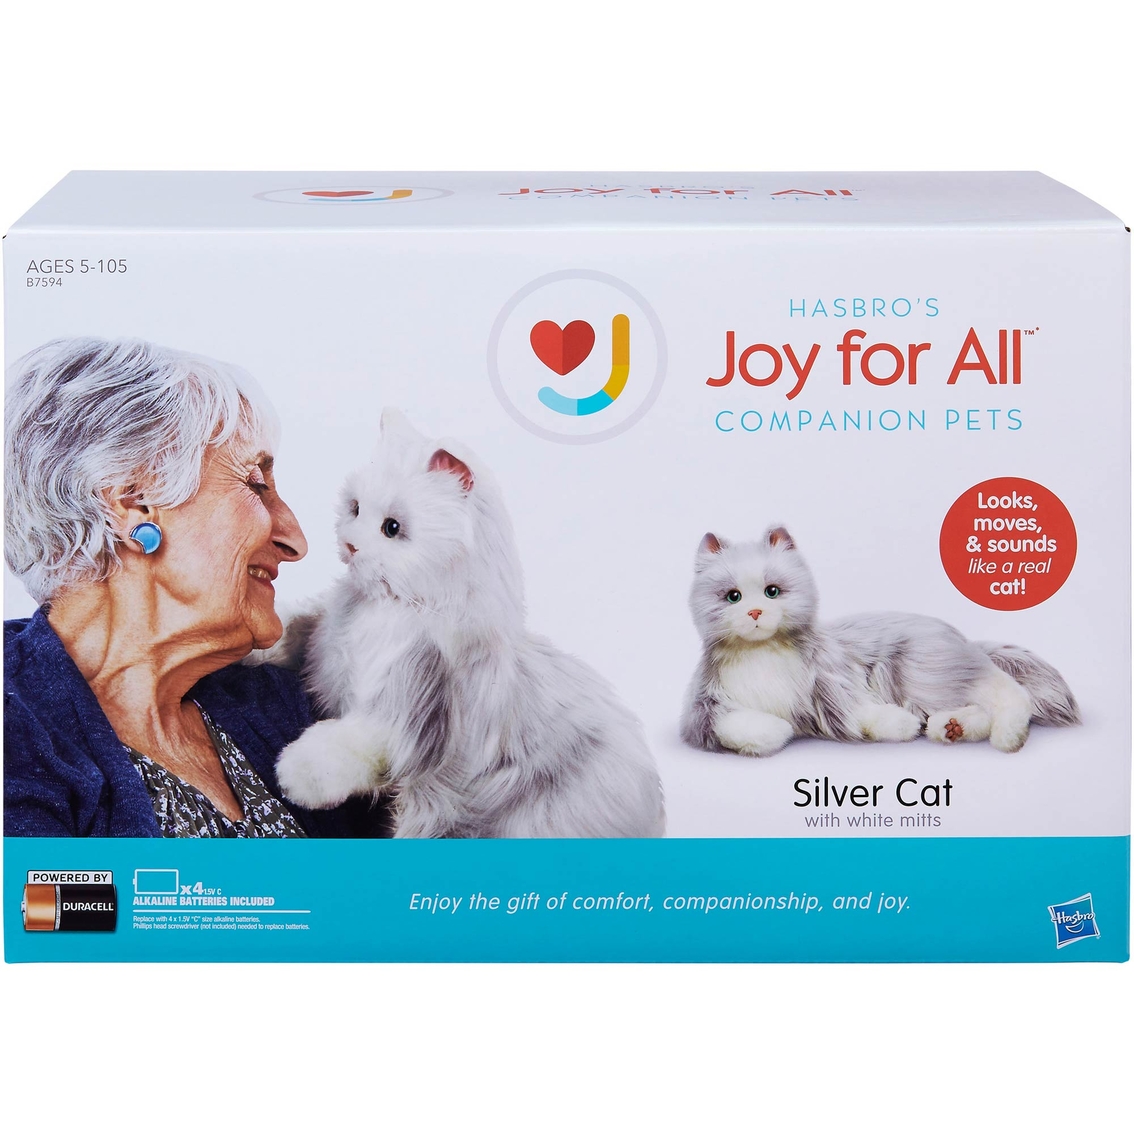 Hasbro Joy for All Companion Pets Silver Cat with White Mitts - Image 2 of 4